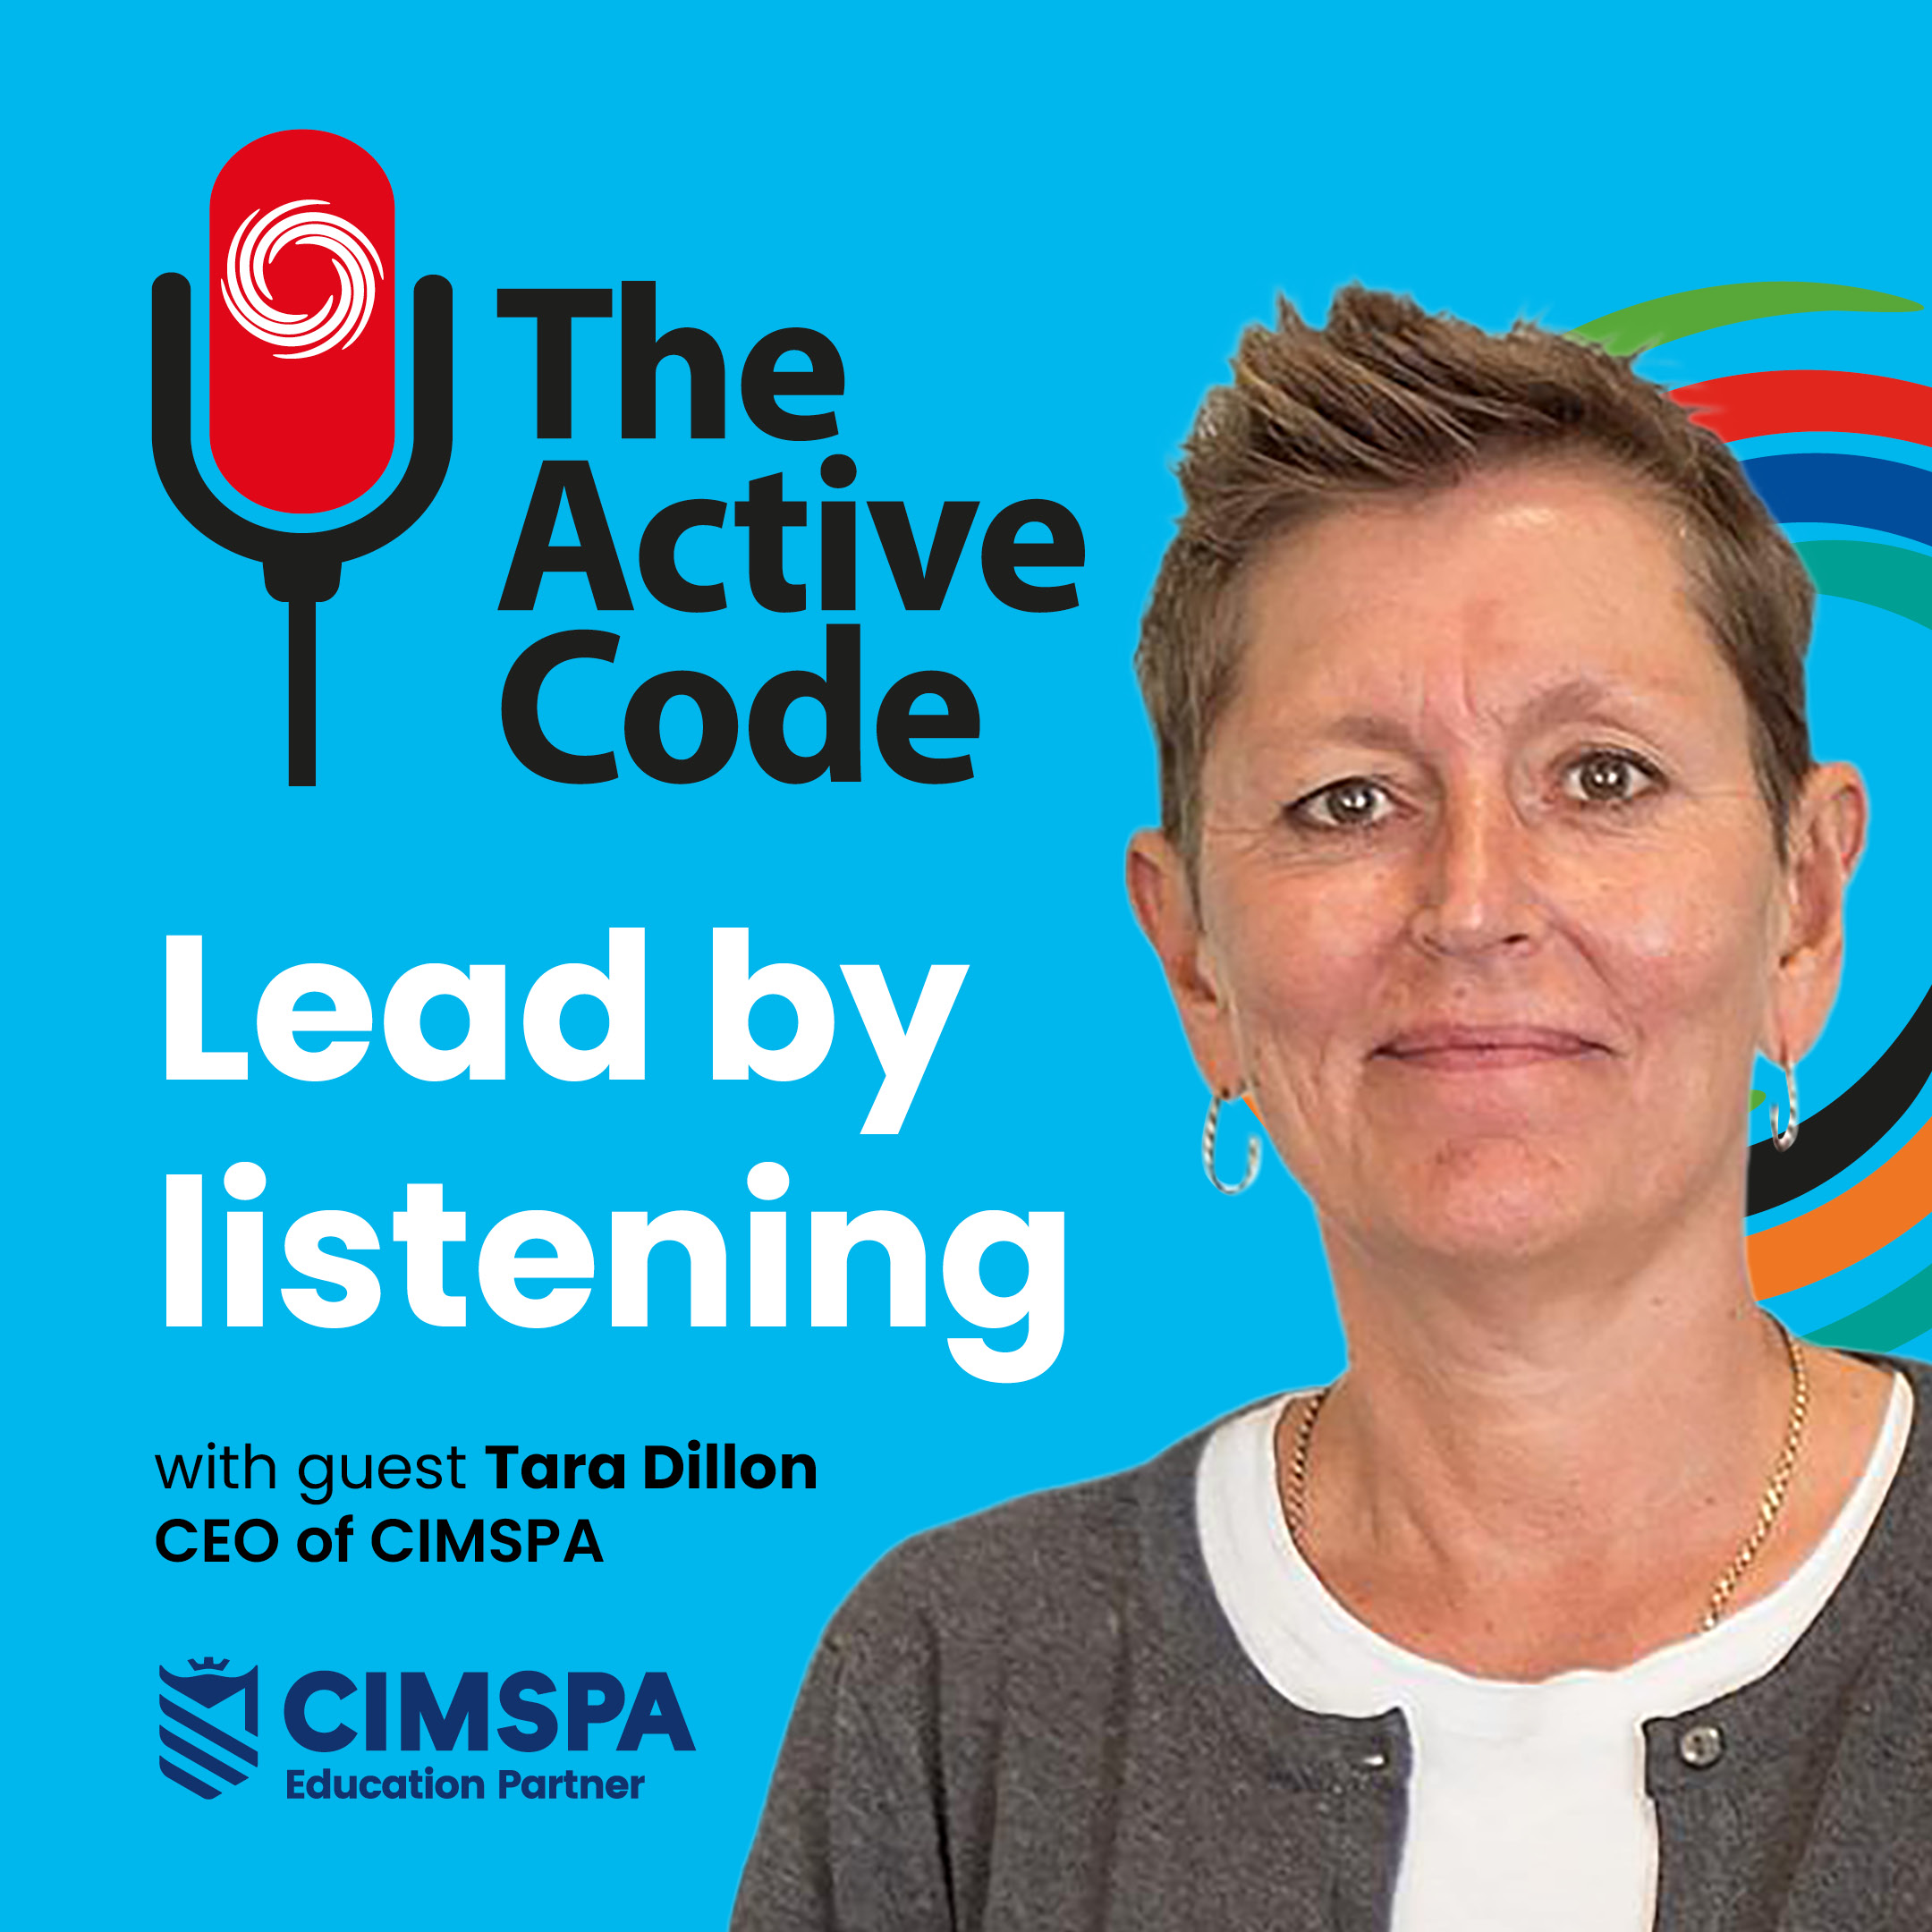 The Active Code – Lead by listening